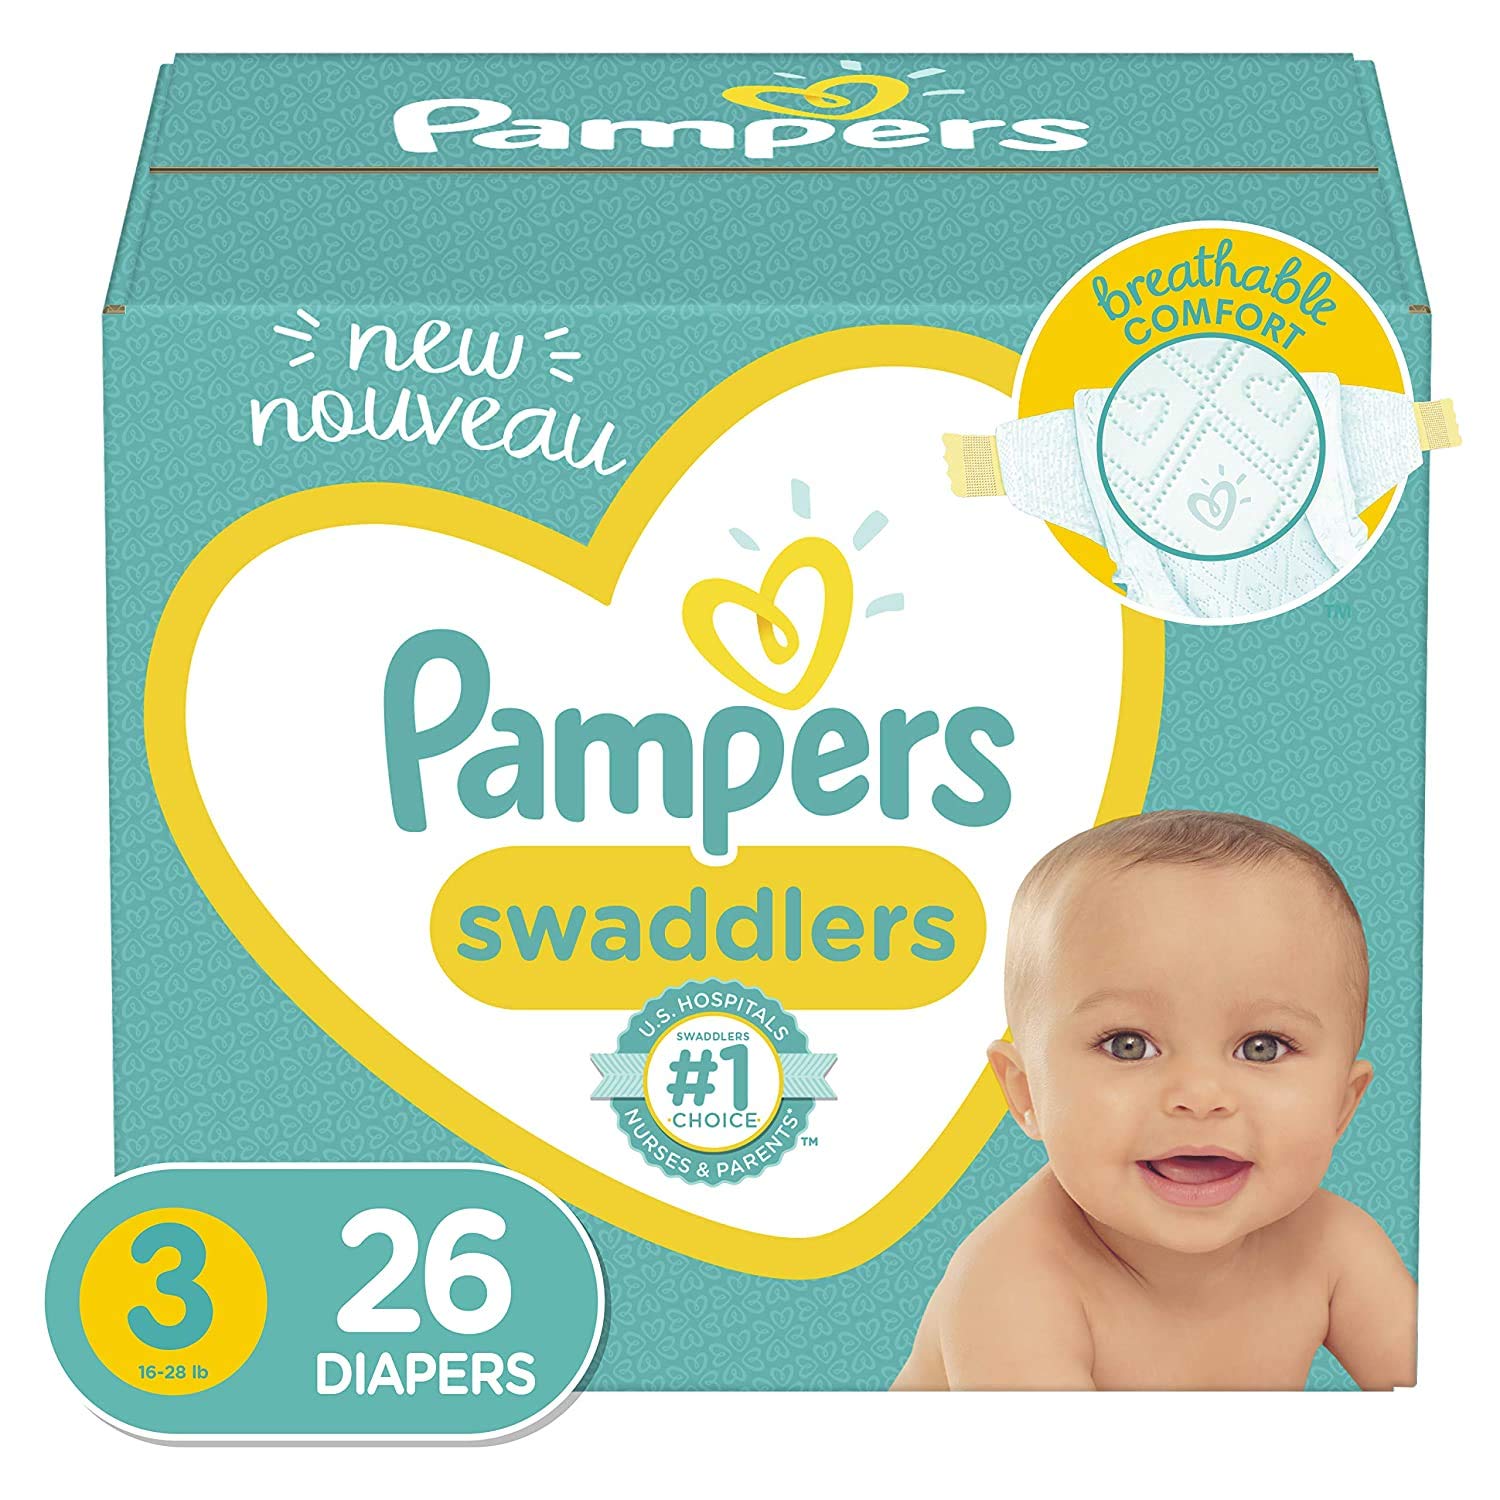 pampers maxi 4